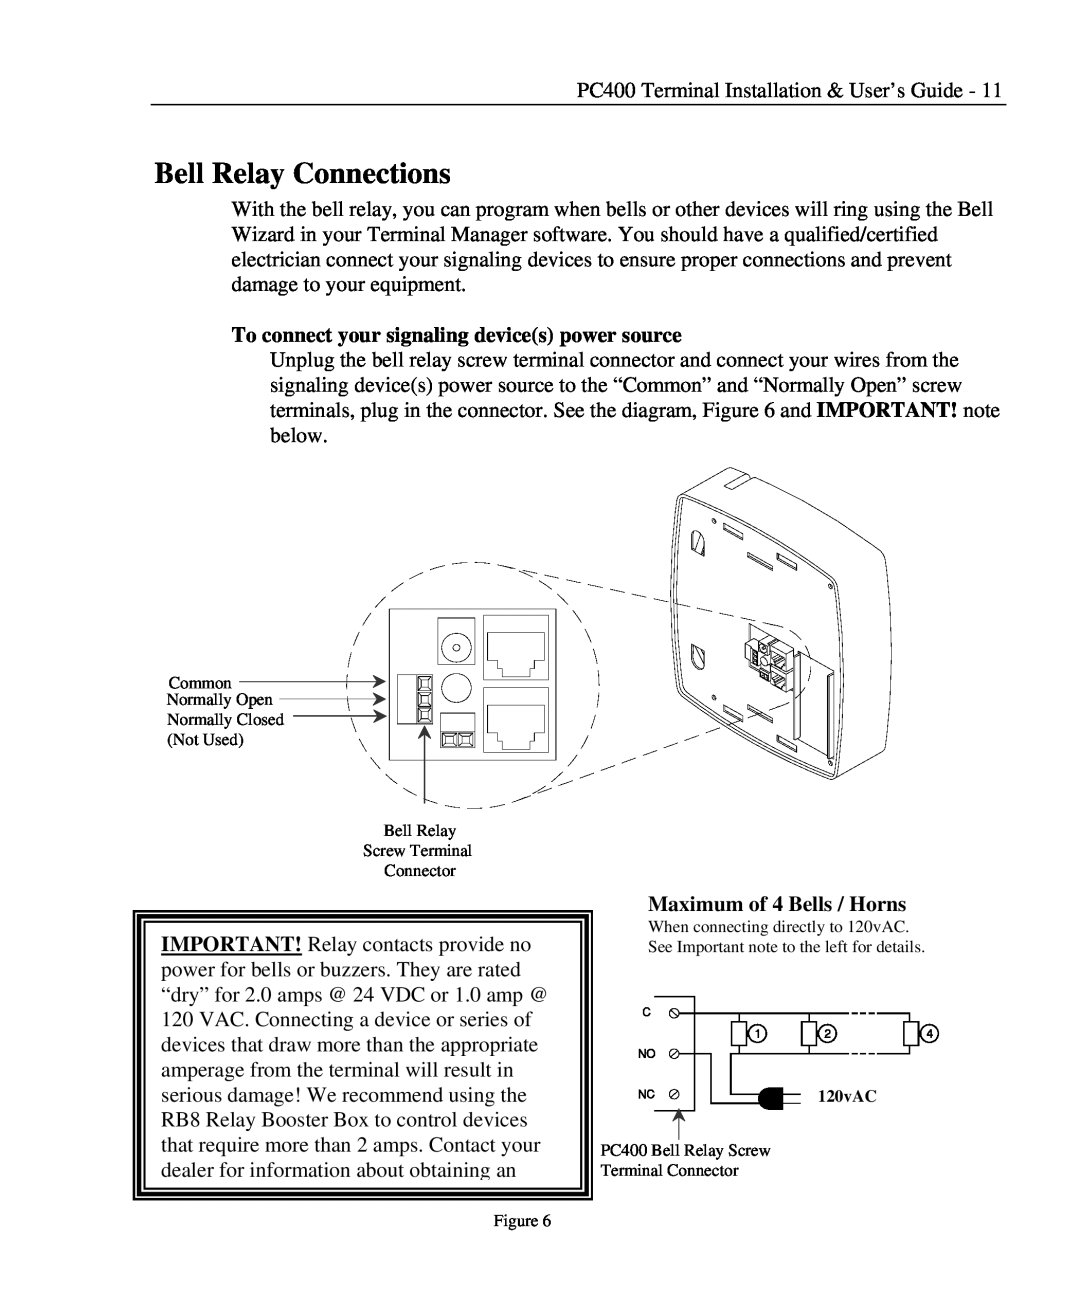 Lathem PC400TX manual Bell Relay Connections, To connect your signaling devices power source, Maximum of 4 Bells / Horns 